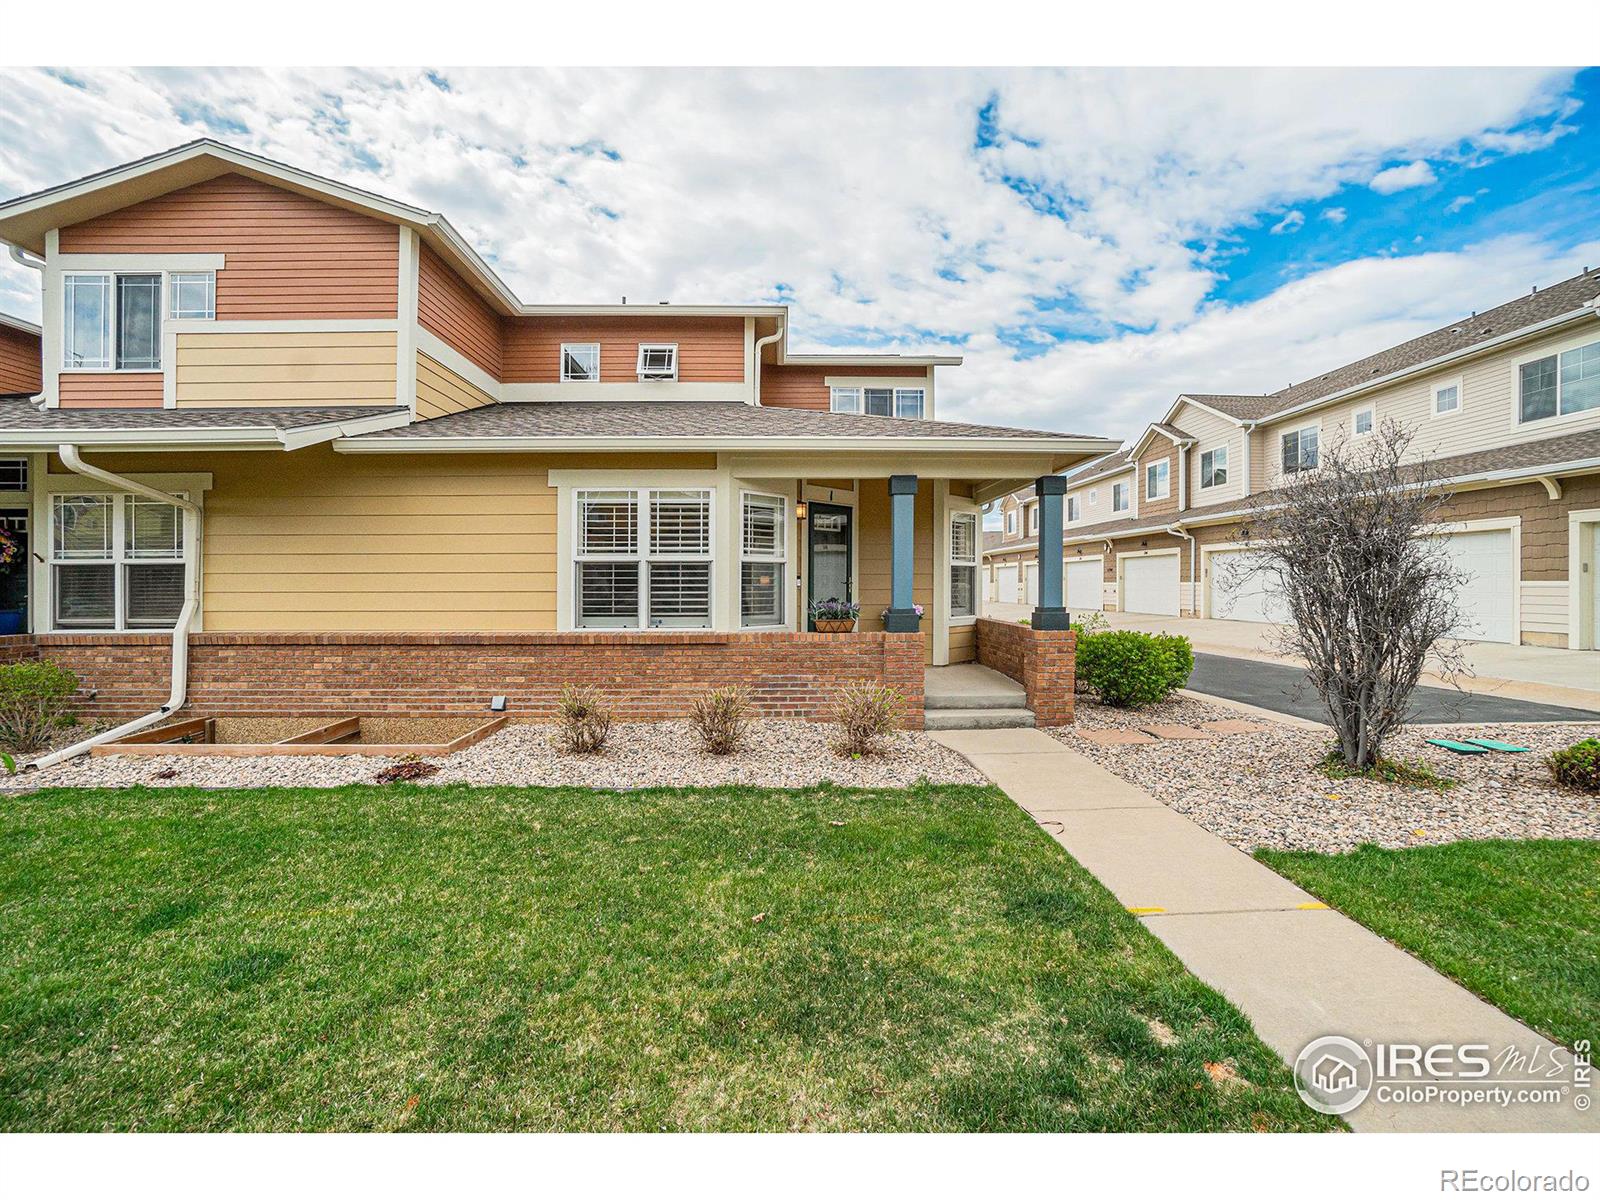 2557  Limon Drive, fort collins MLS: 4567891008381 Beds: 3 Baths: 4 Price: $465,000